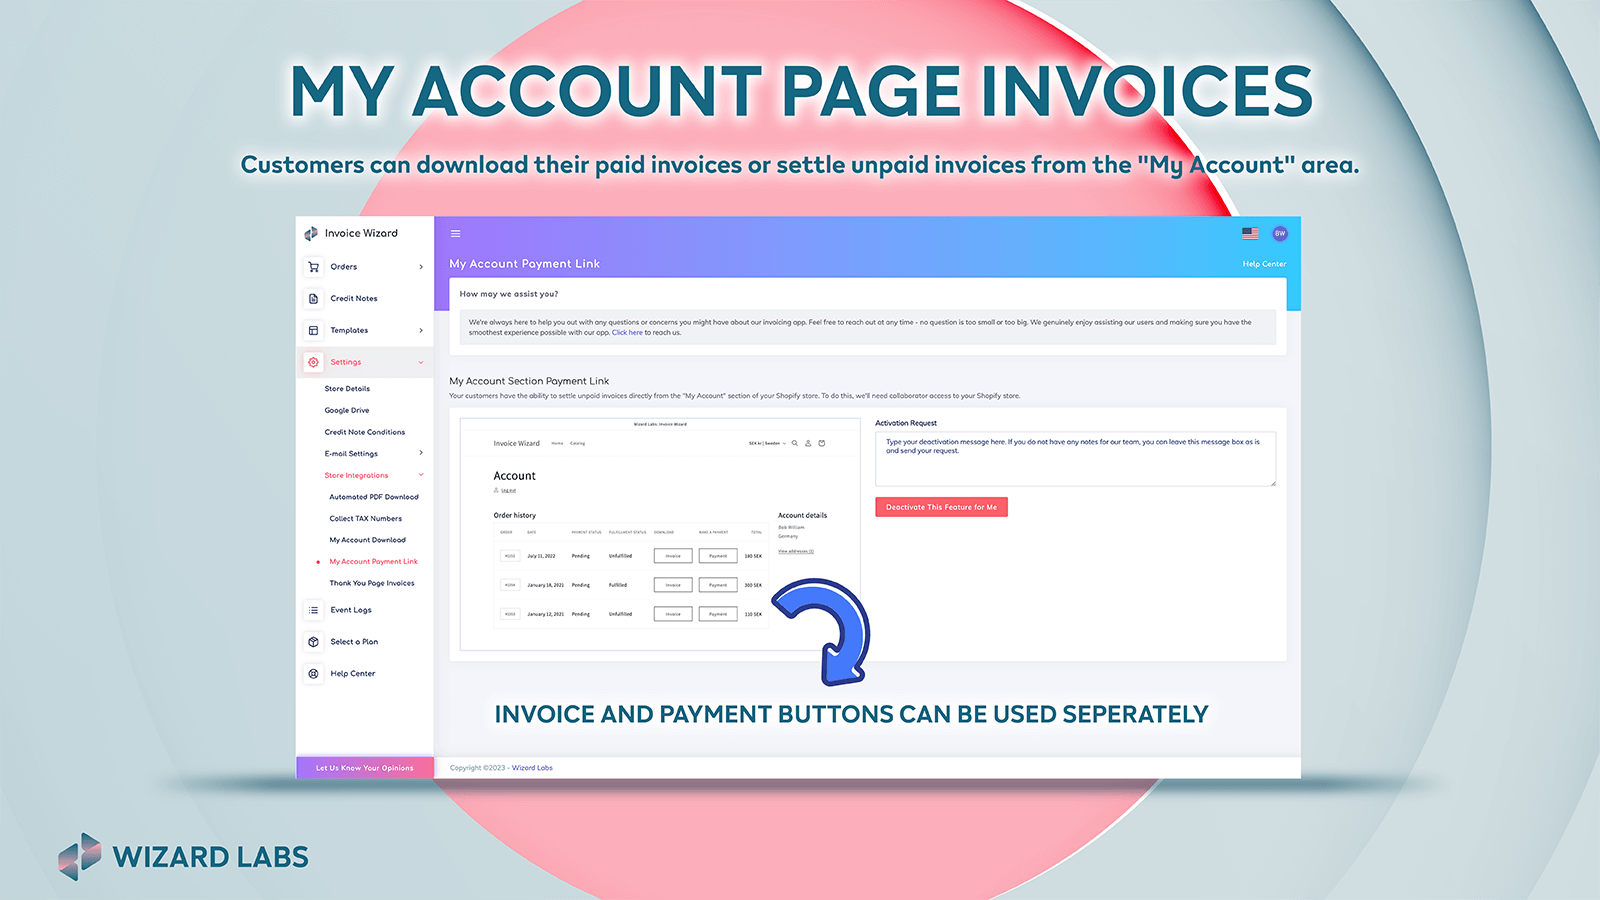 My Account Page invoices.